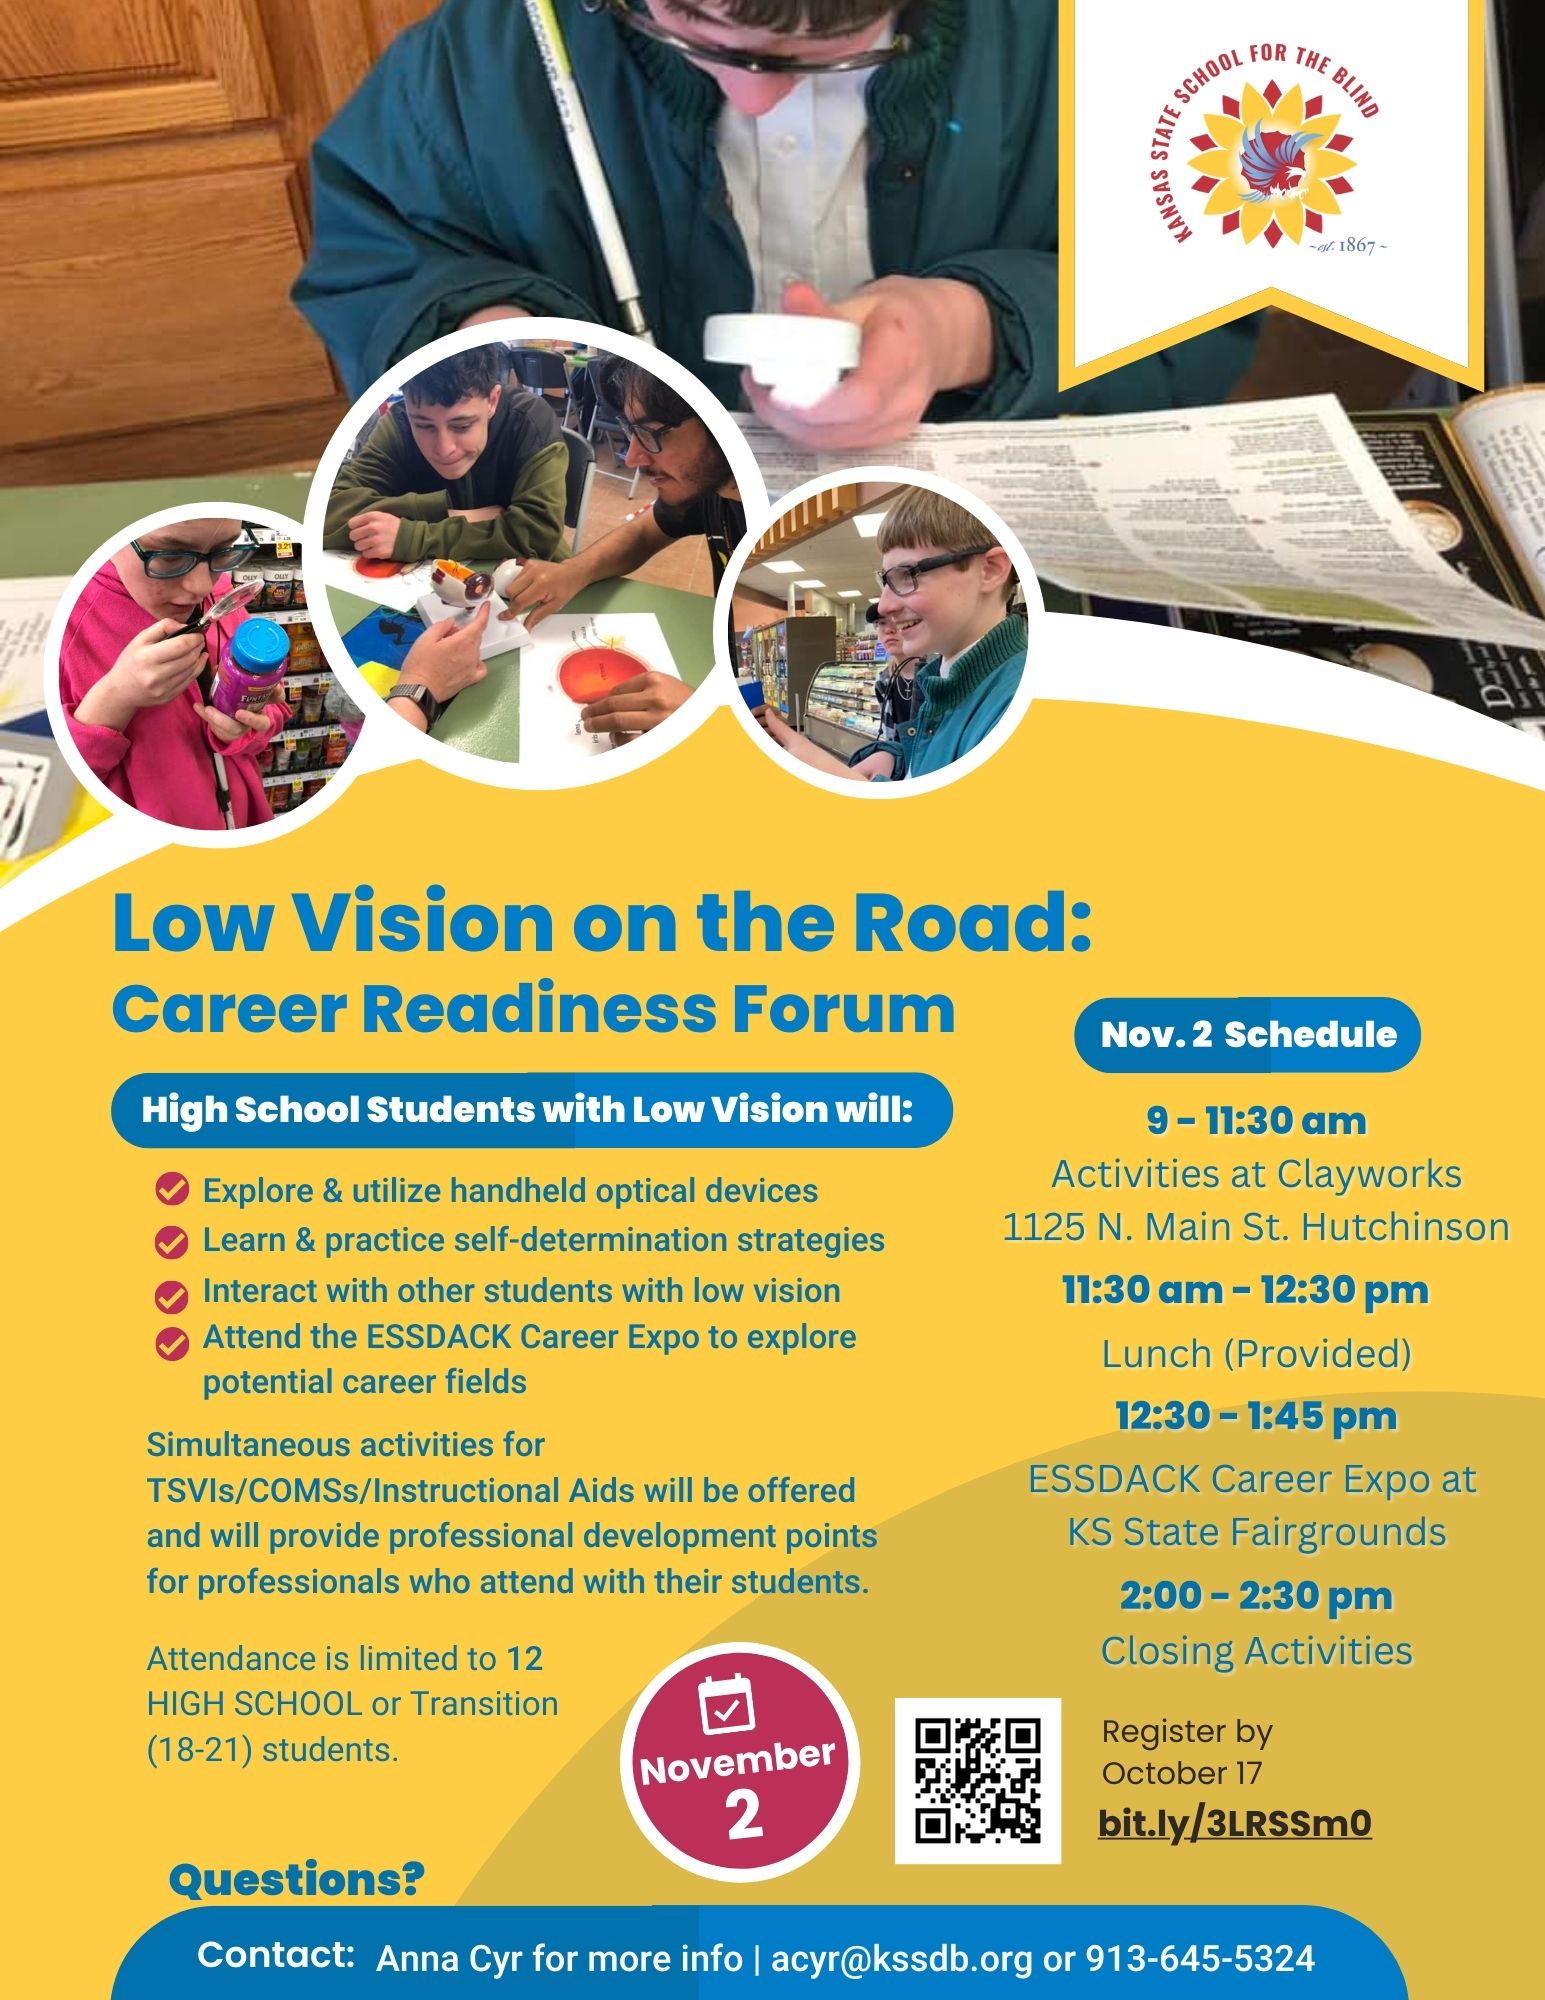 Flyer of Low Vision on the Road, with several photos of students using low vision devices